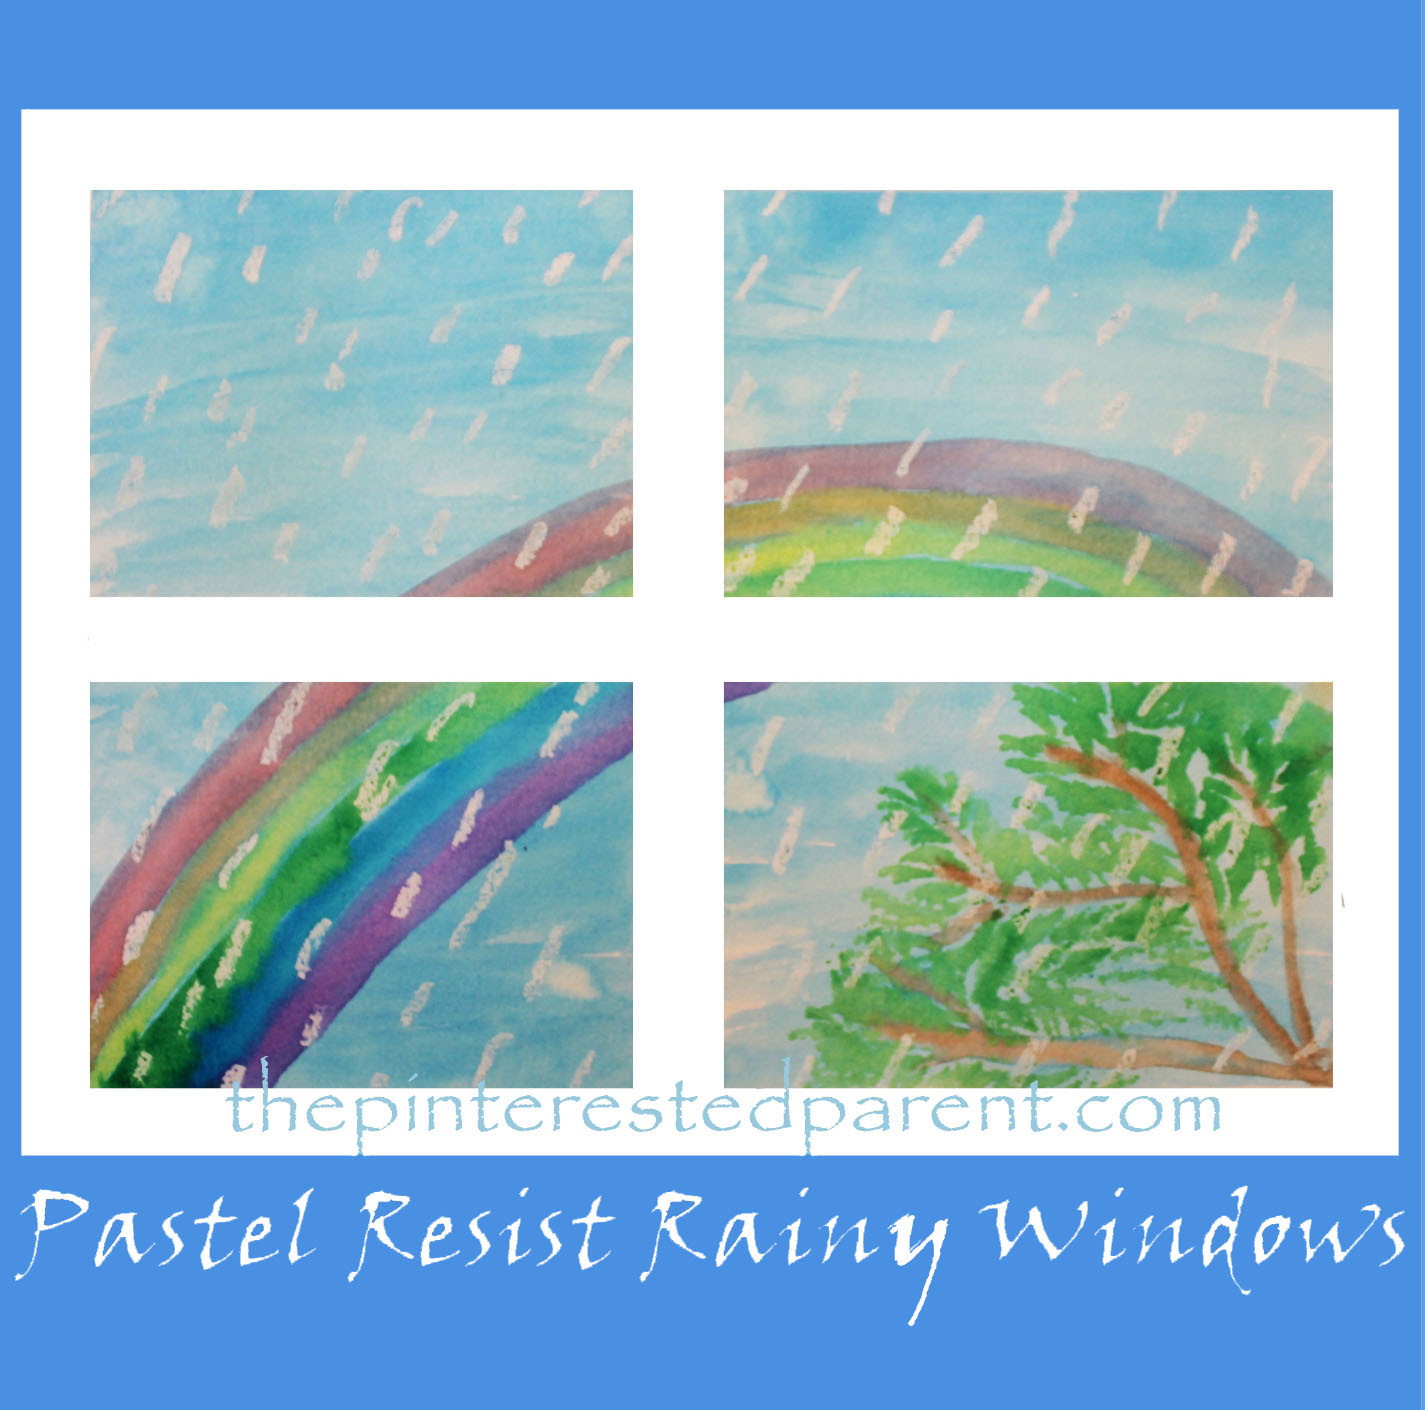 Pastel resist Rainy Windows Painting - easy spring arts and crafts projects for kids.